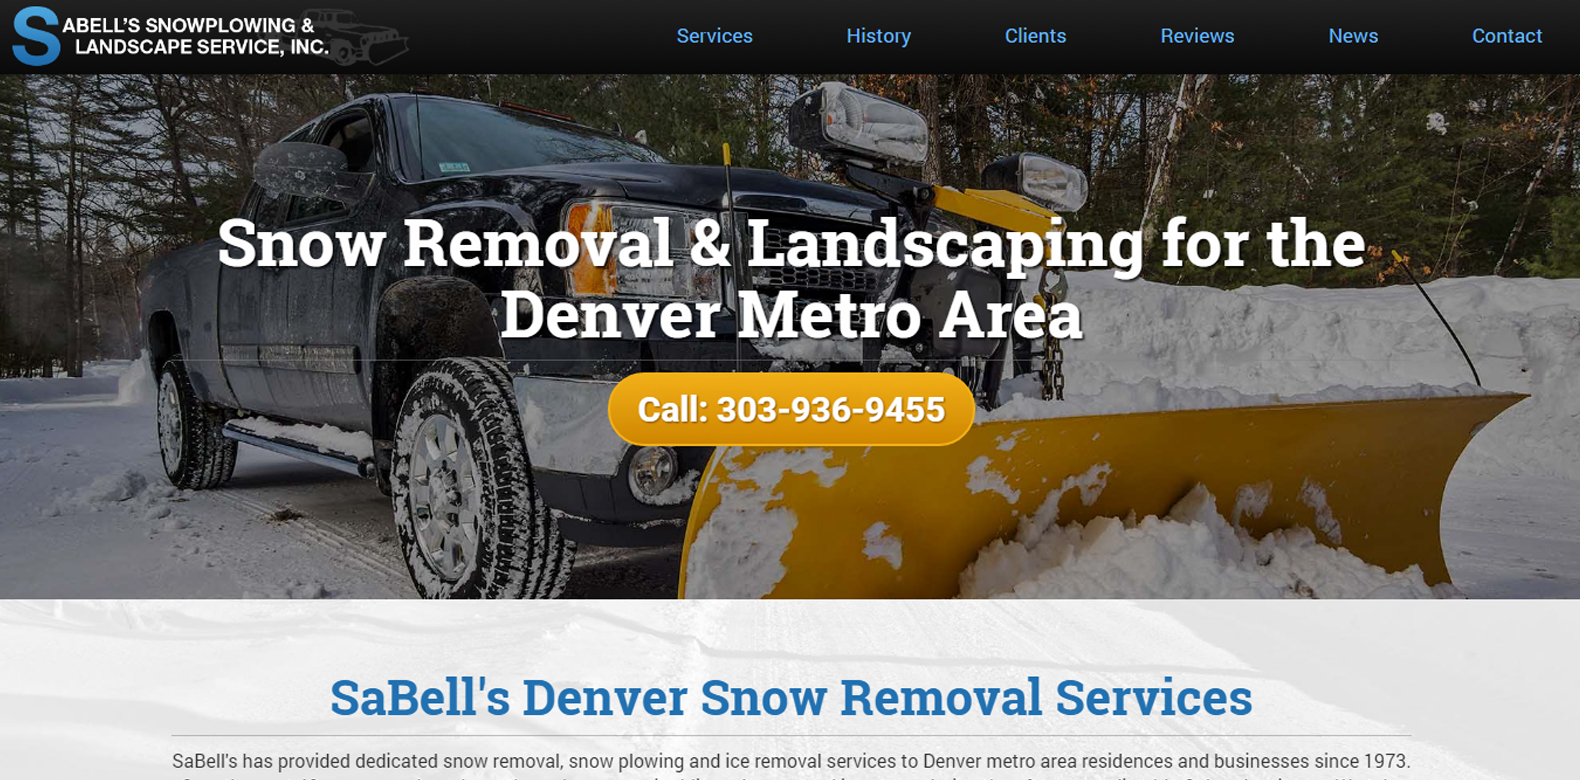 
New Website Upgrade: Sabell's Snowplowing & Landscaping Service